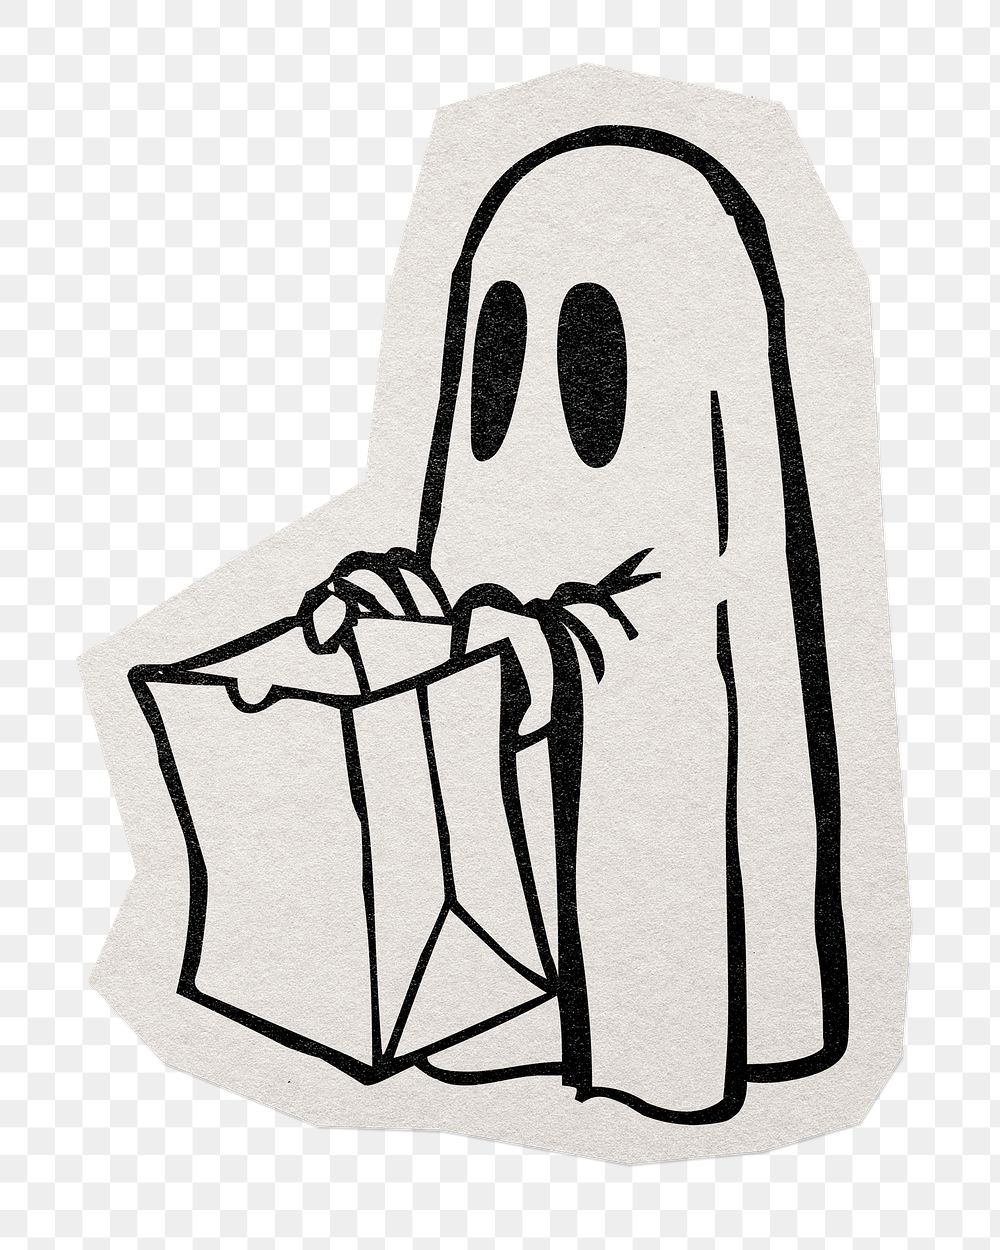 Halloween costume png sticker, paper cut on transparent background